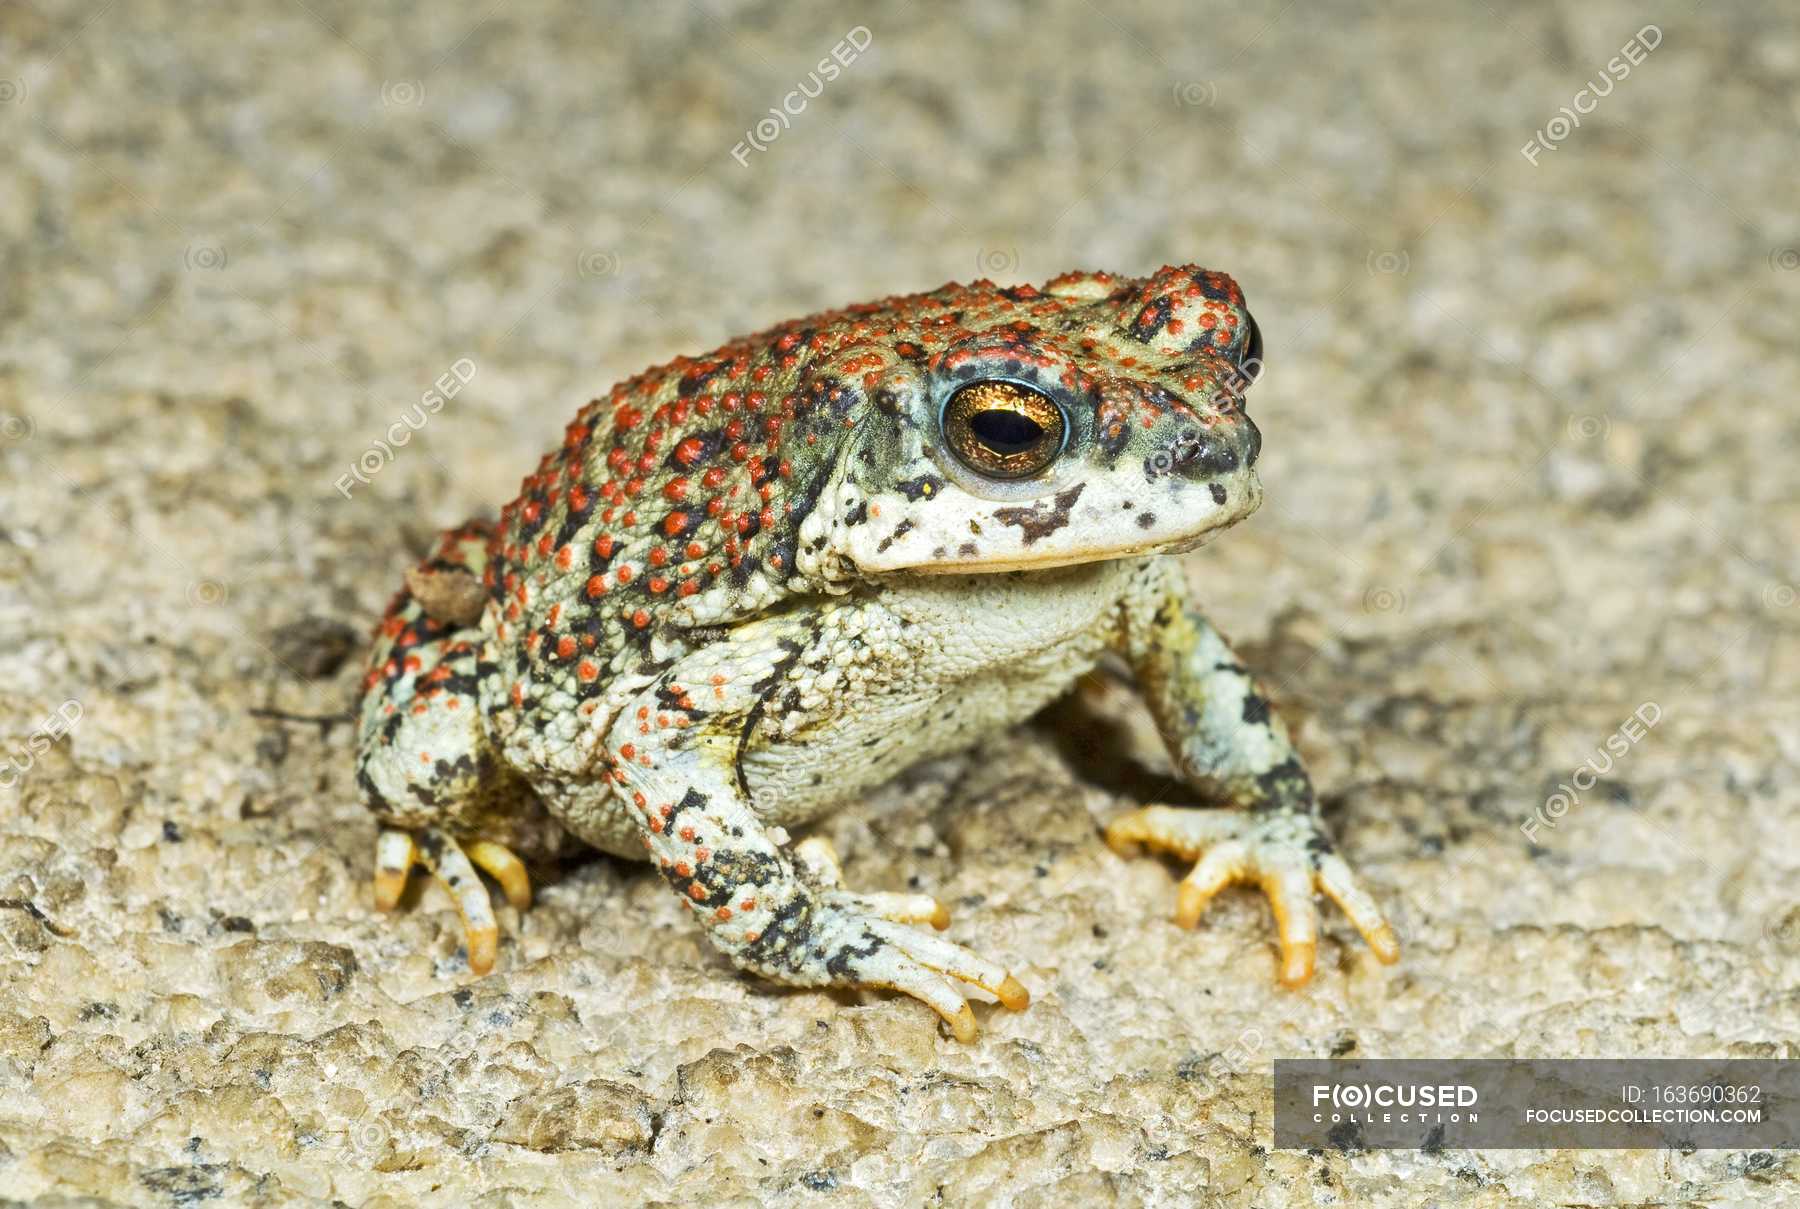 Red-Spotted Toad (Bufo Punctatus) — Stock Photo | #163690362